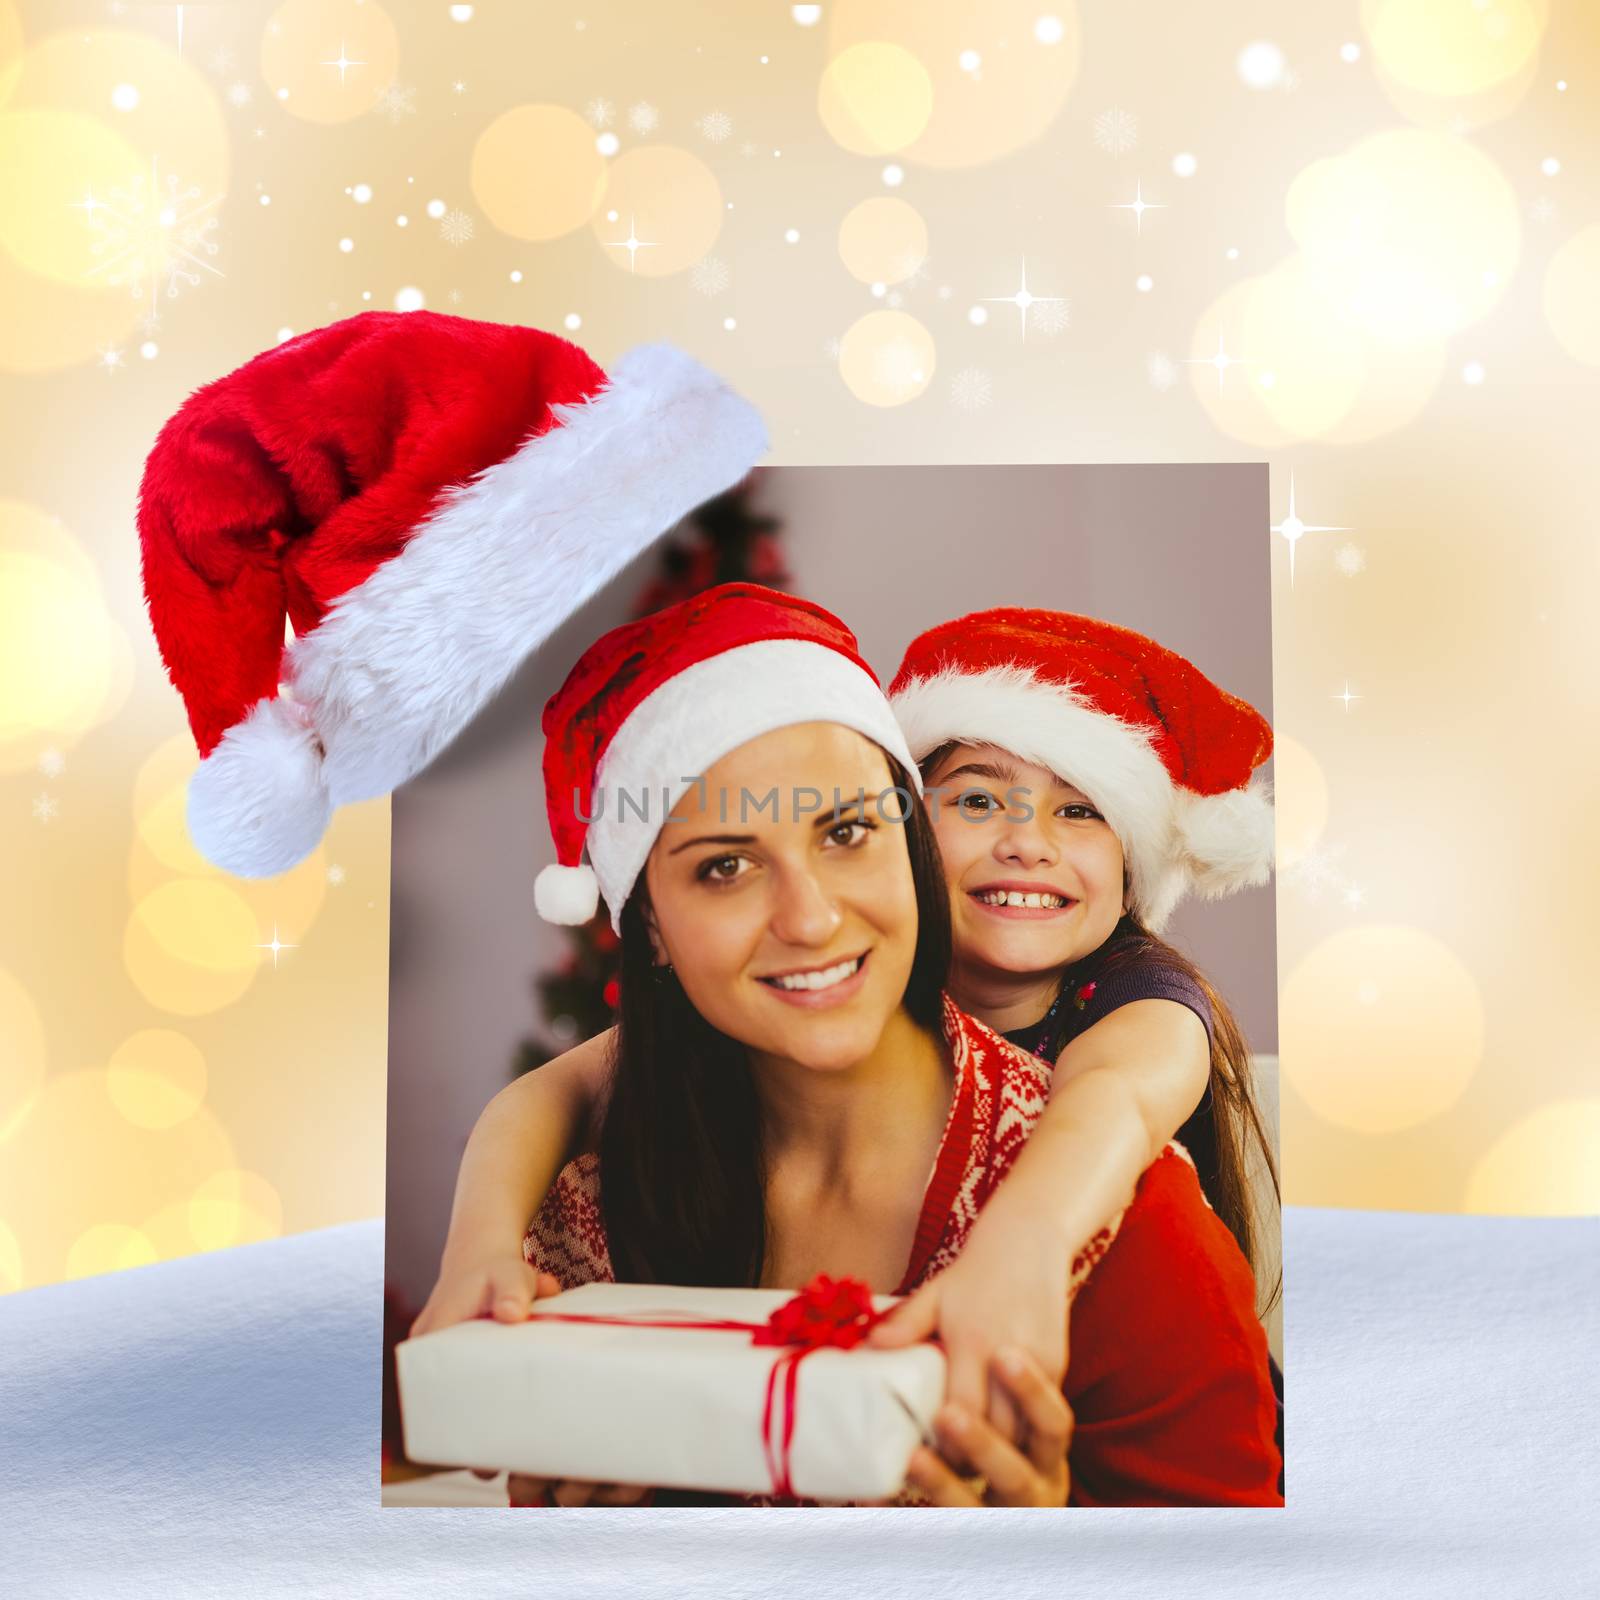 Festive mother and daughter smiling at camera against yellow abstract light spot design